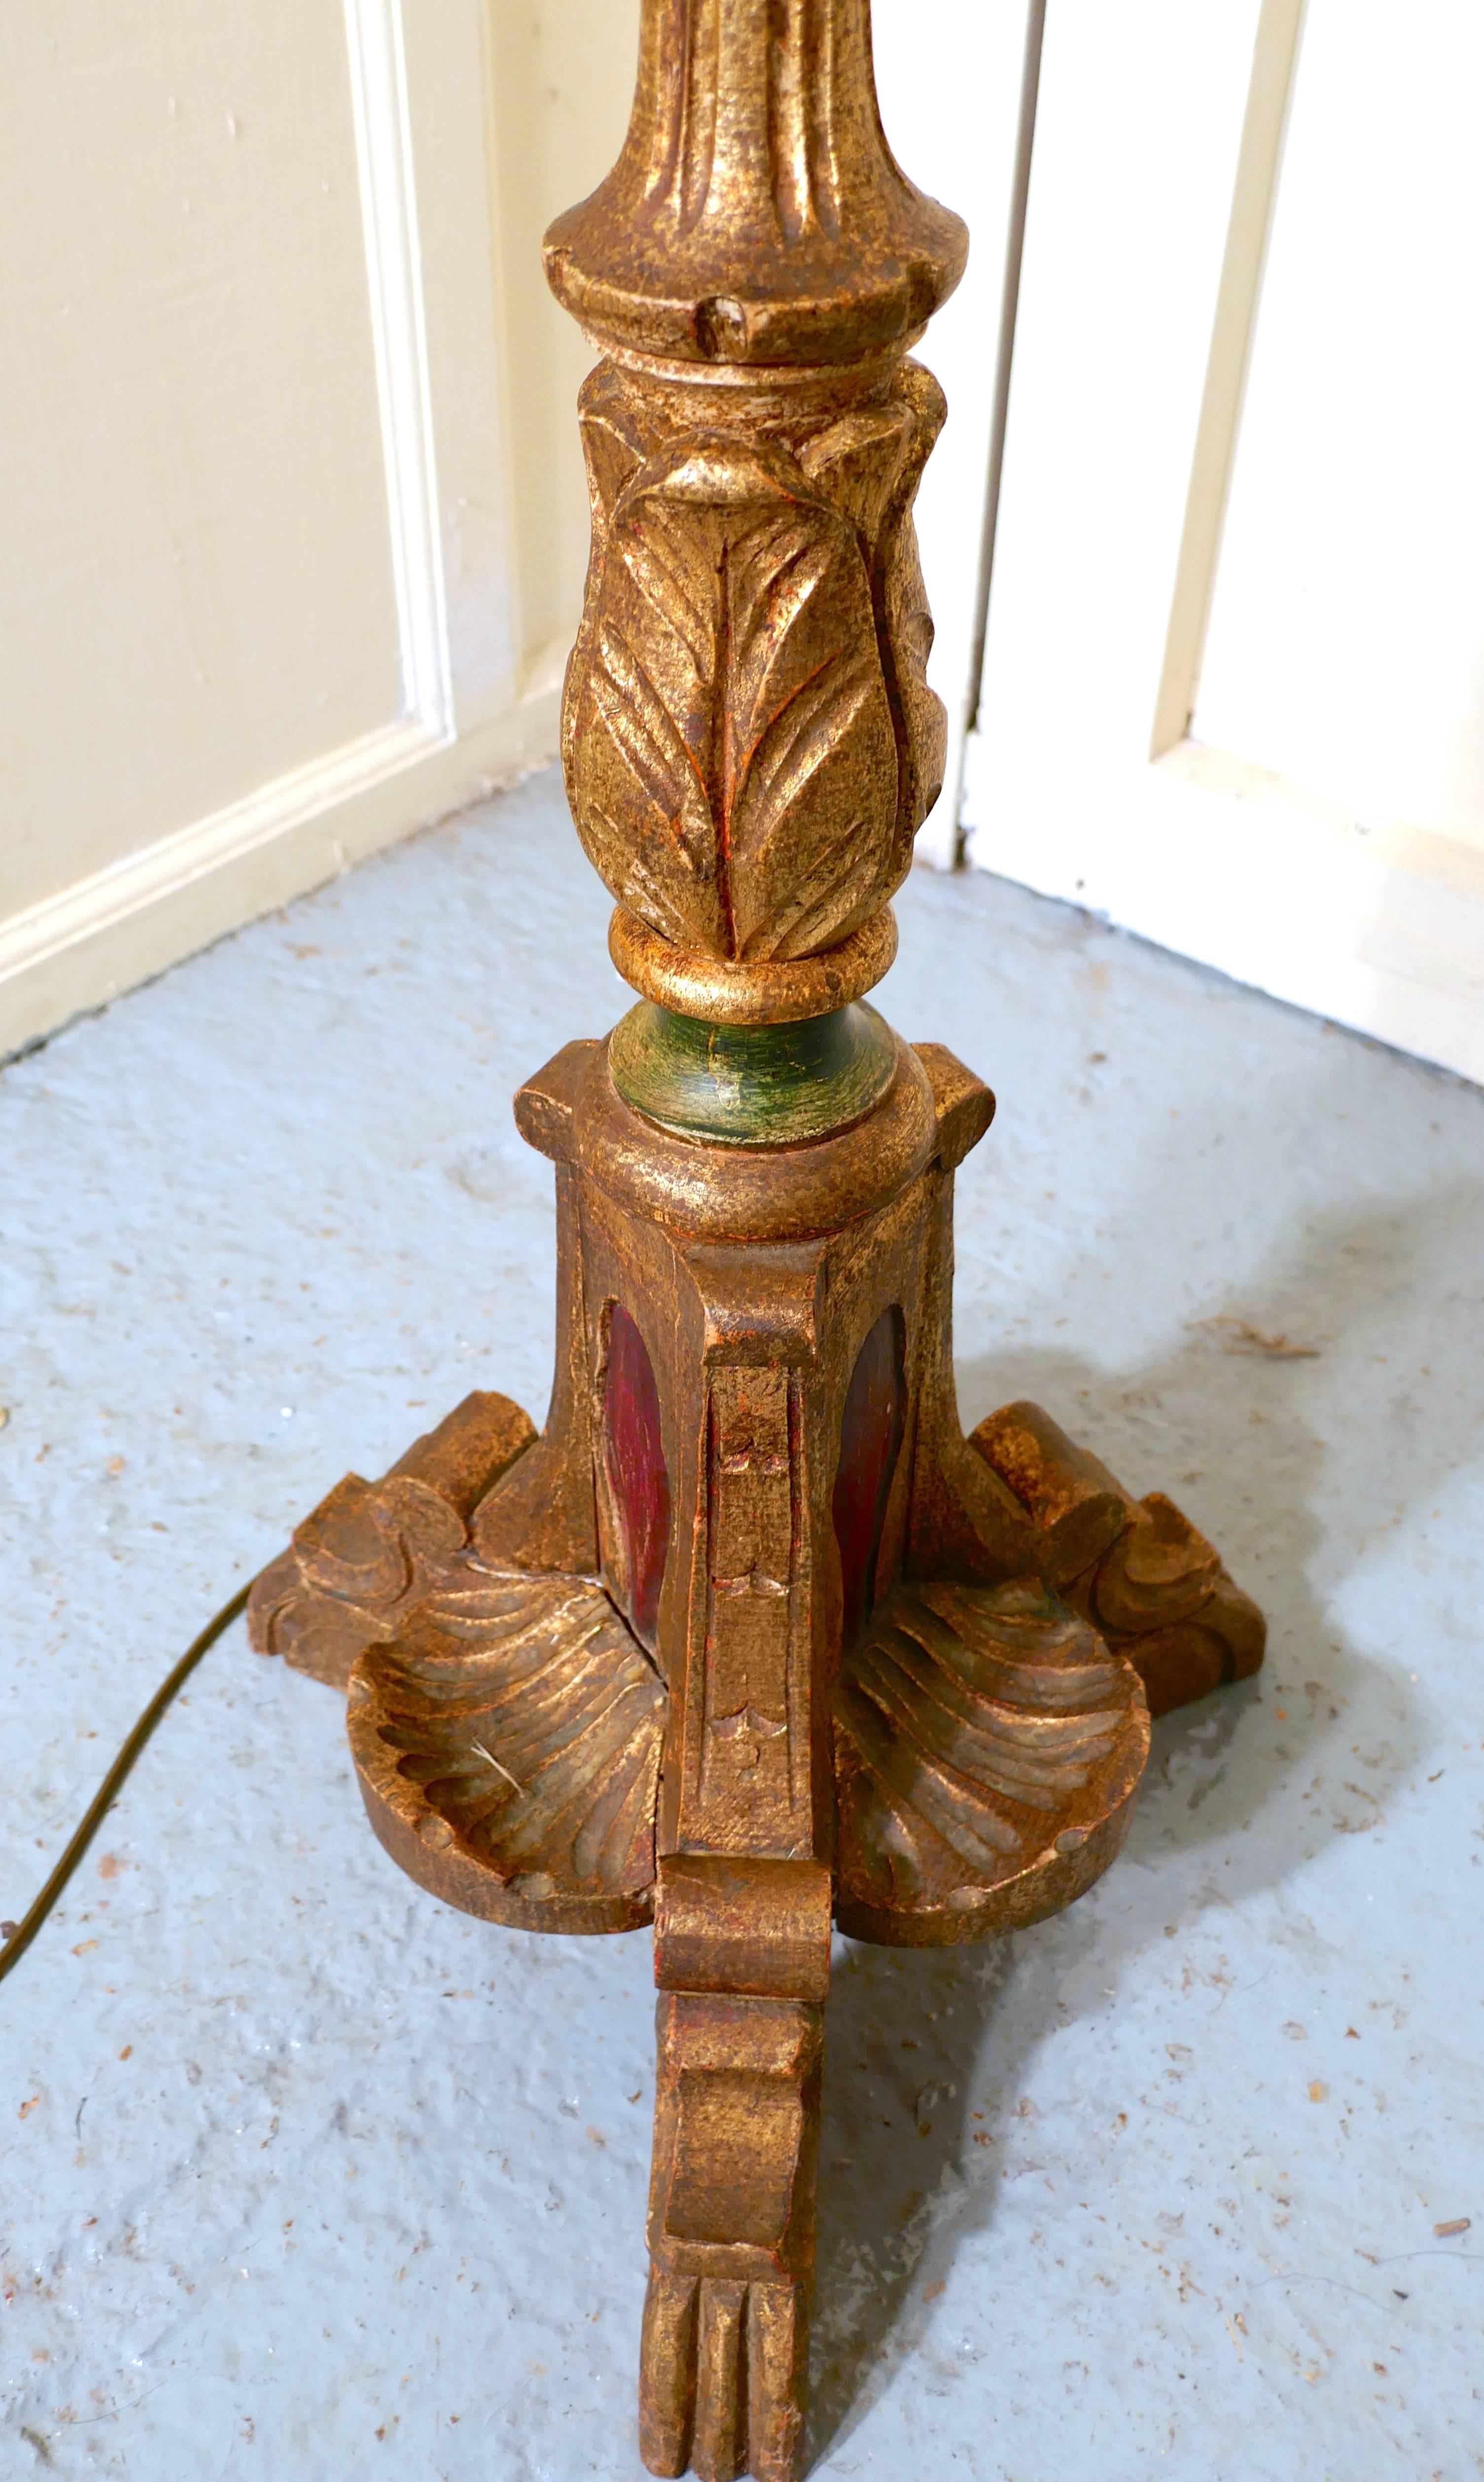 French carved gilt floor standing or standard lamp

This is an attractive piece in age darkened gold with green and red colored panels, the lamp stands on a carved three-footed base and has an elaborately carved upright column with an imitation